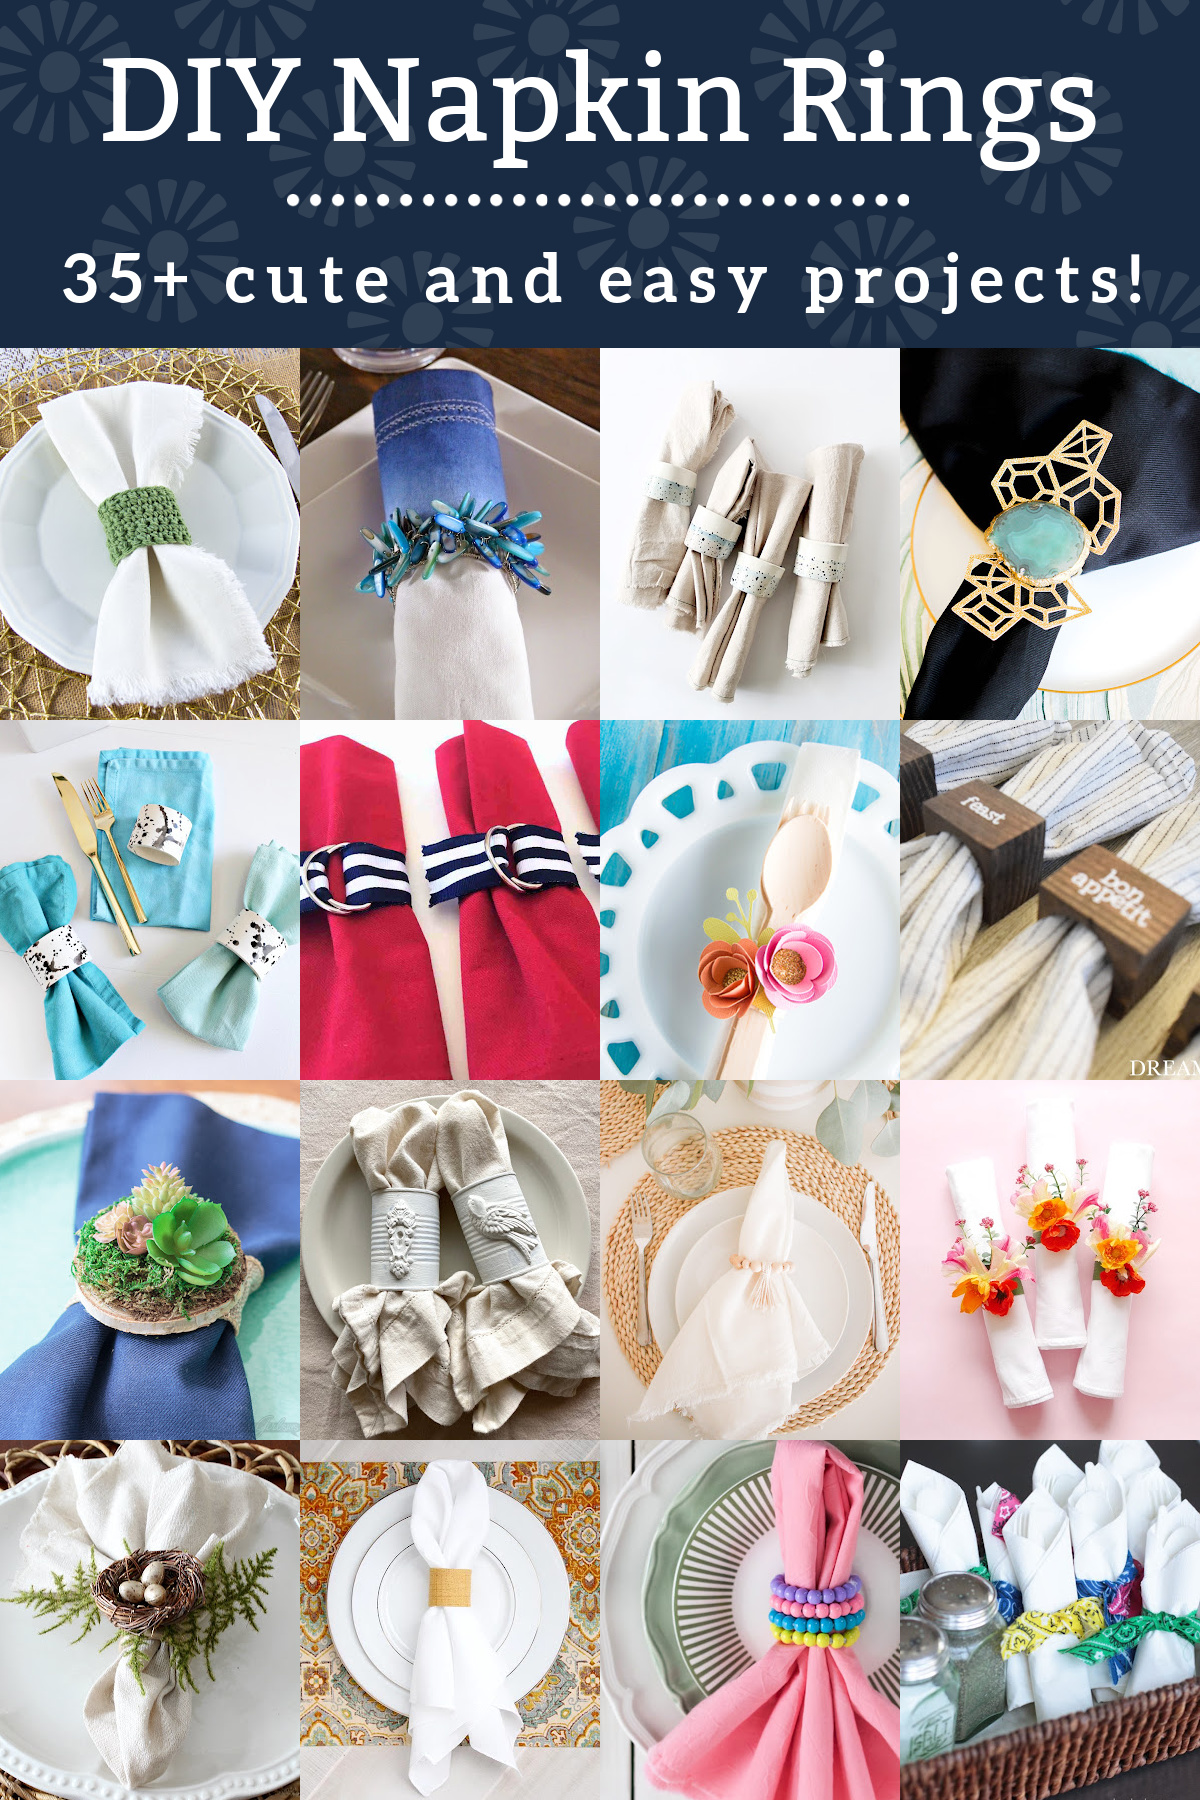 DIY Napkin Rings for party or holidays